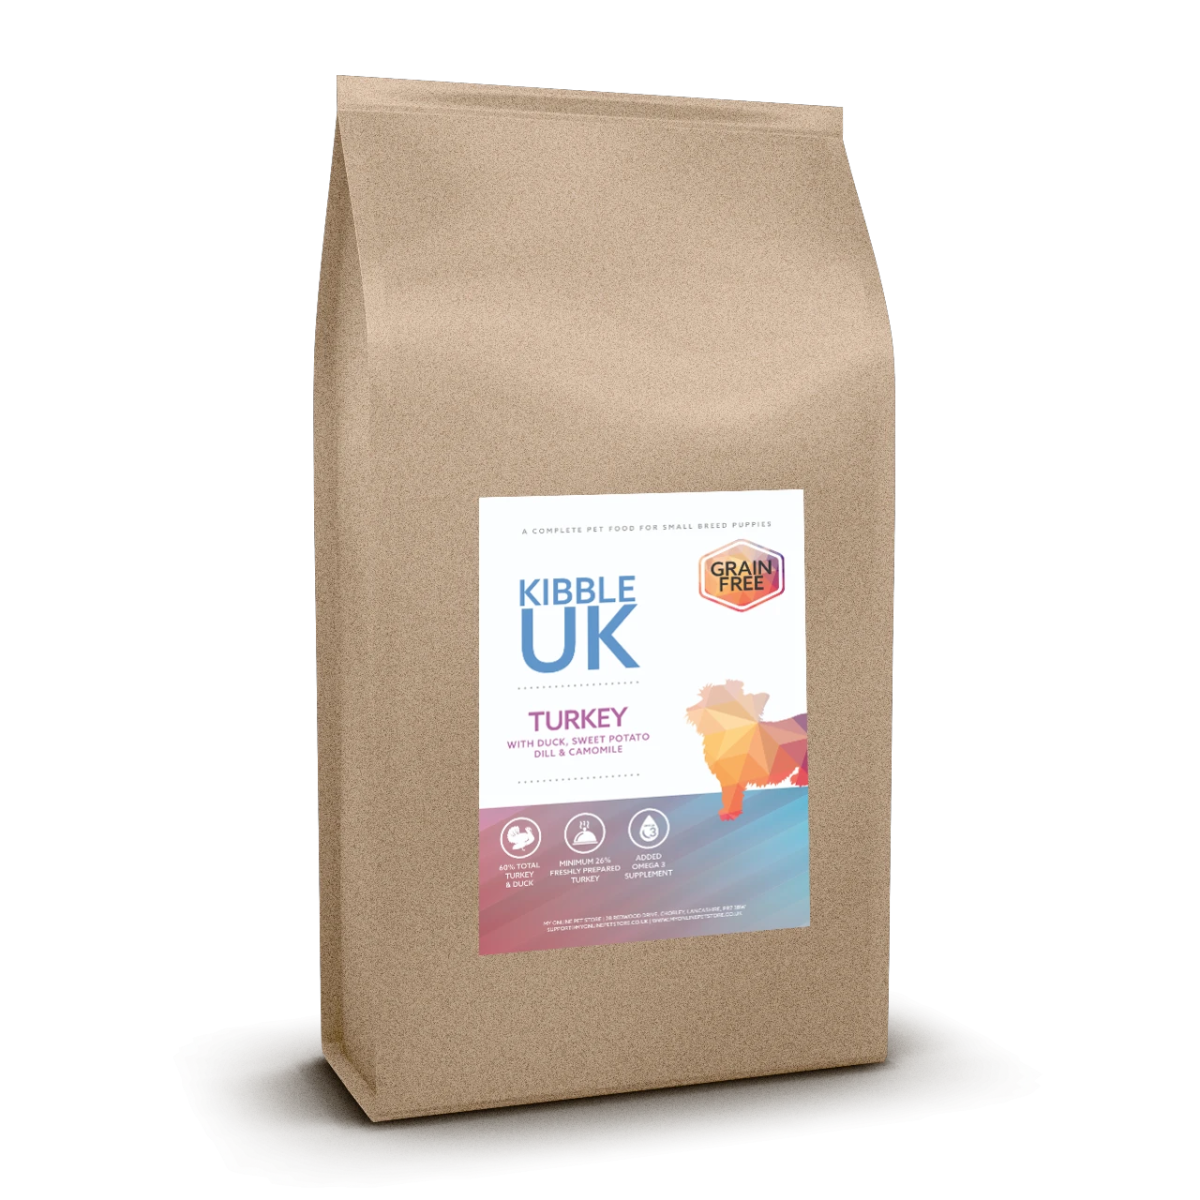 Grain Free Small Breed Puppy Food - Turkey with Duck, Sweet Potato, Dill & Camomile - Kibble UK - My Online Pet Store